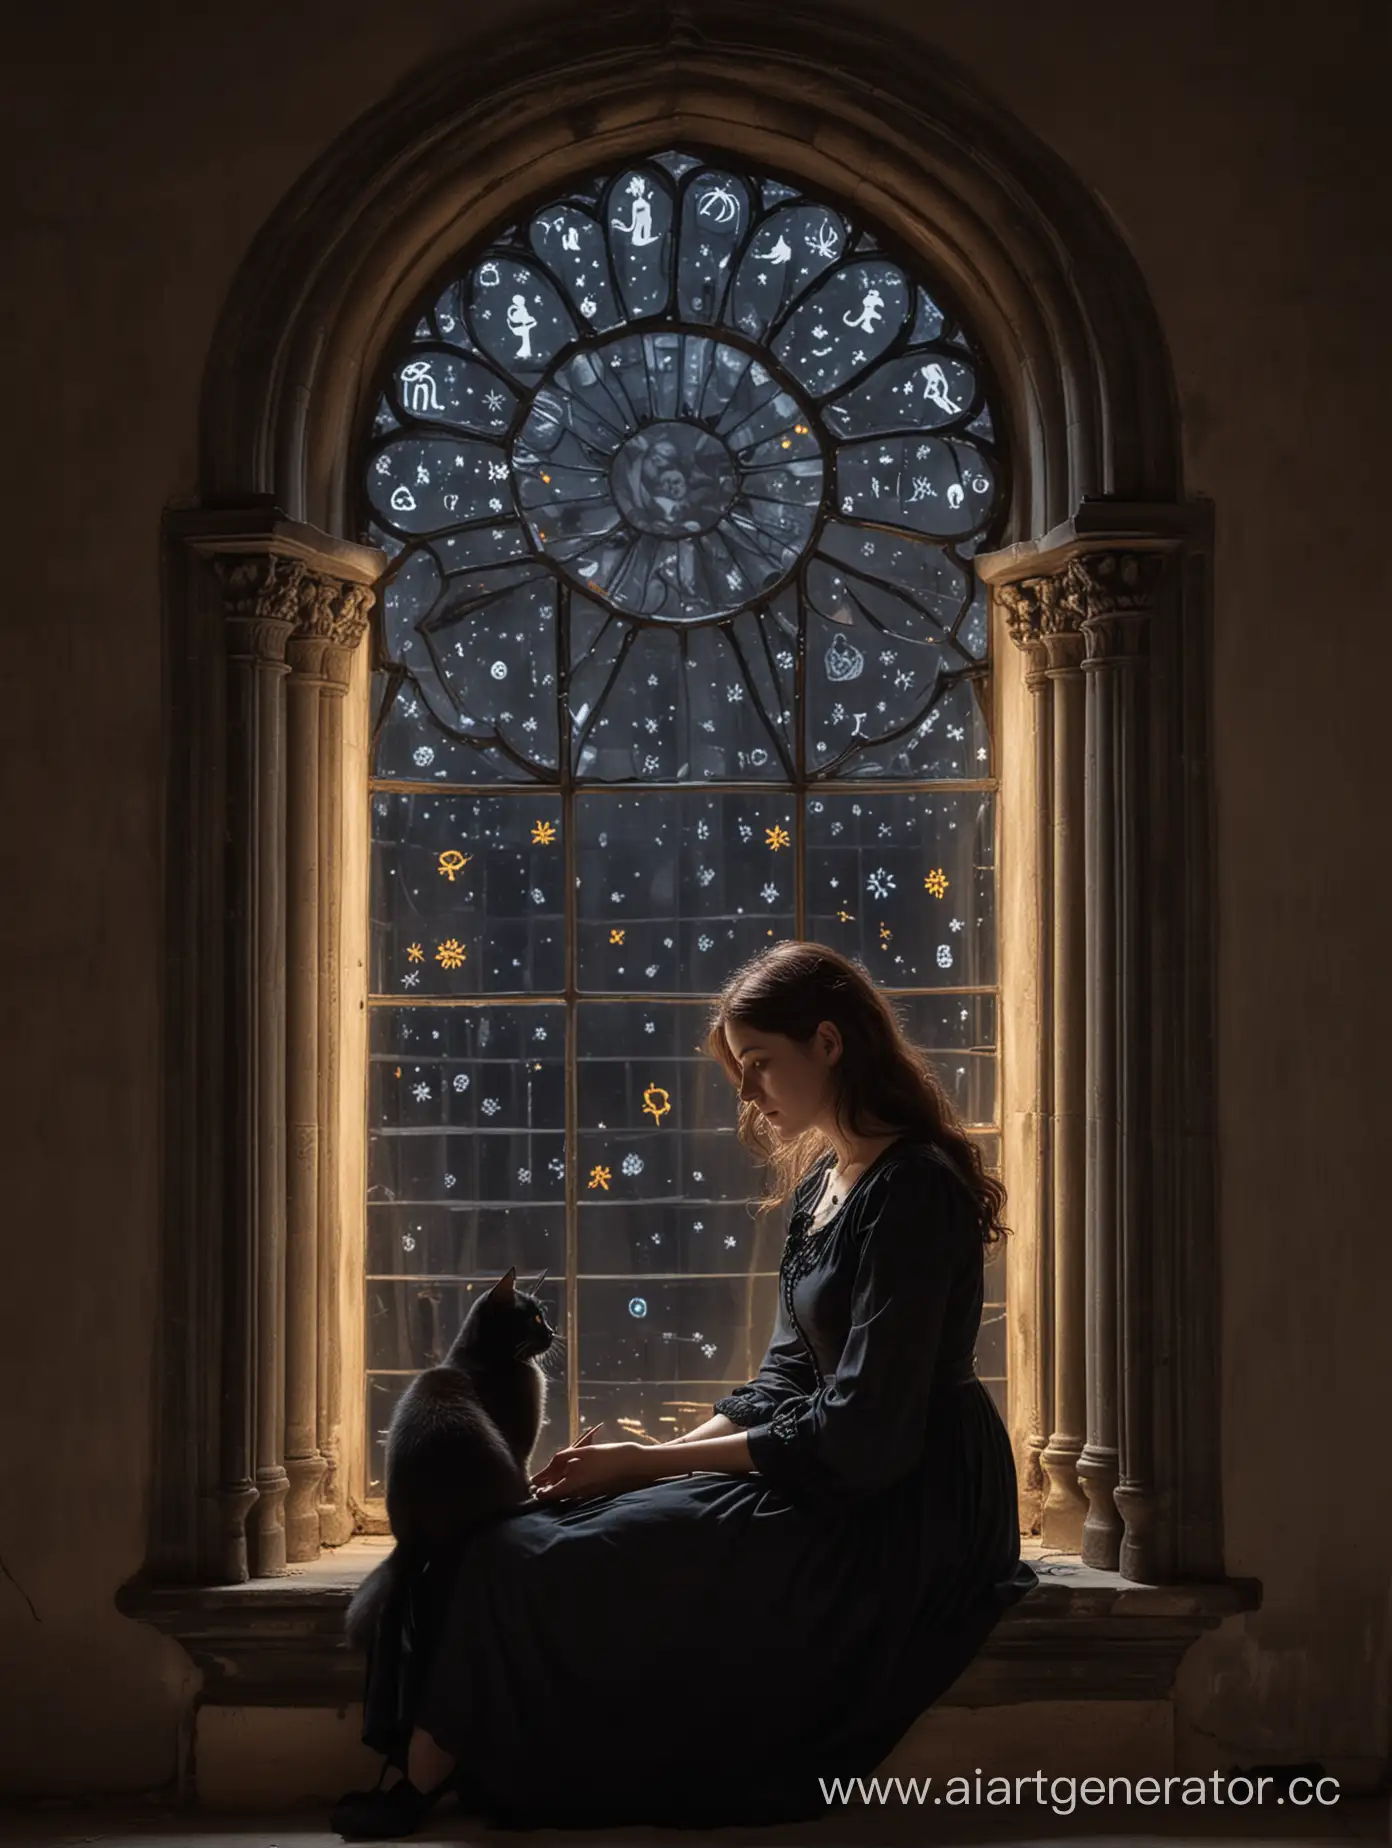 A female astrologer sits in a semi-profile position, her head inclined, illuminated by light from a gothic-style window. A black cat sits on her lap, with symbols in the background.